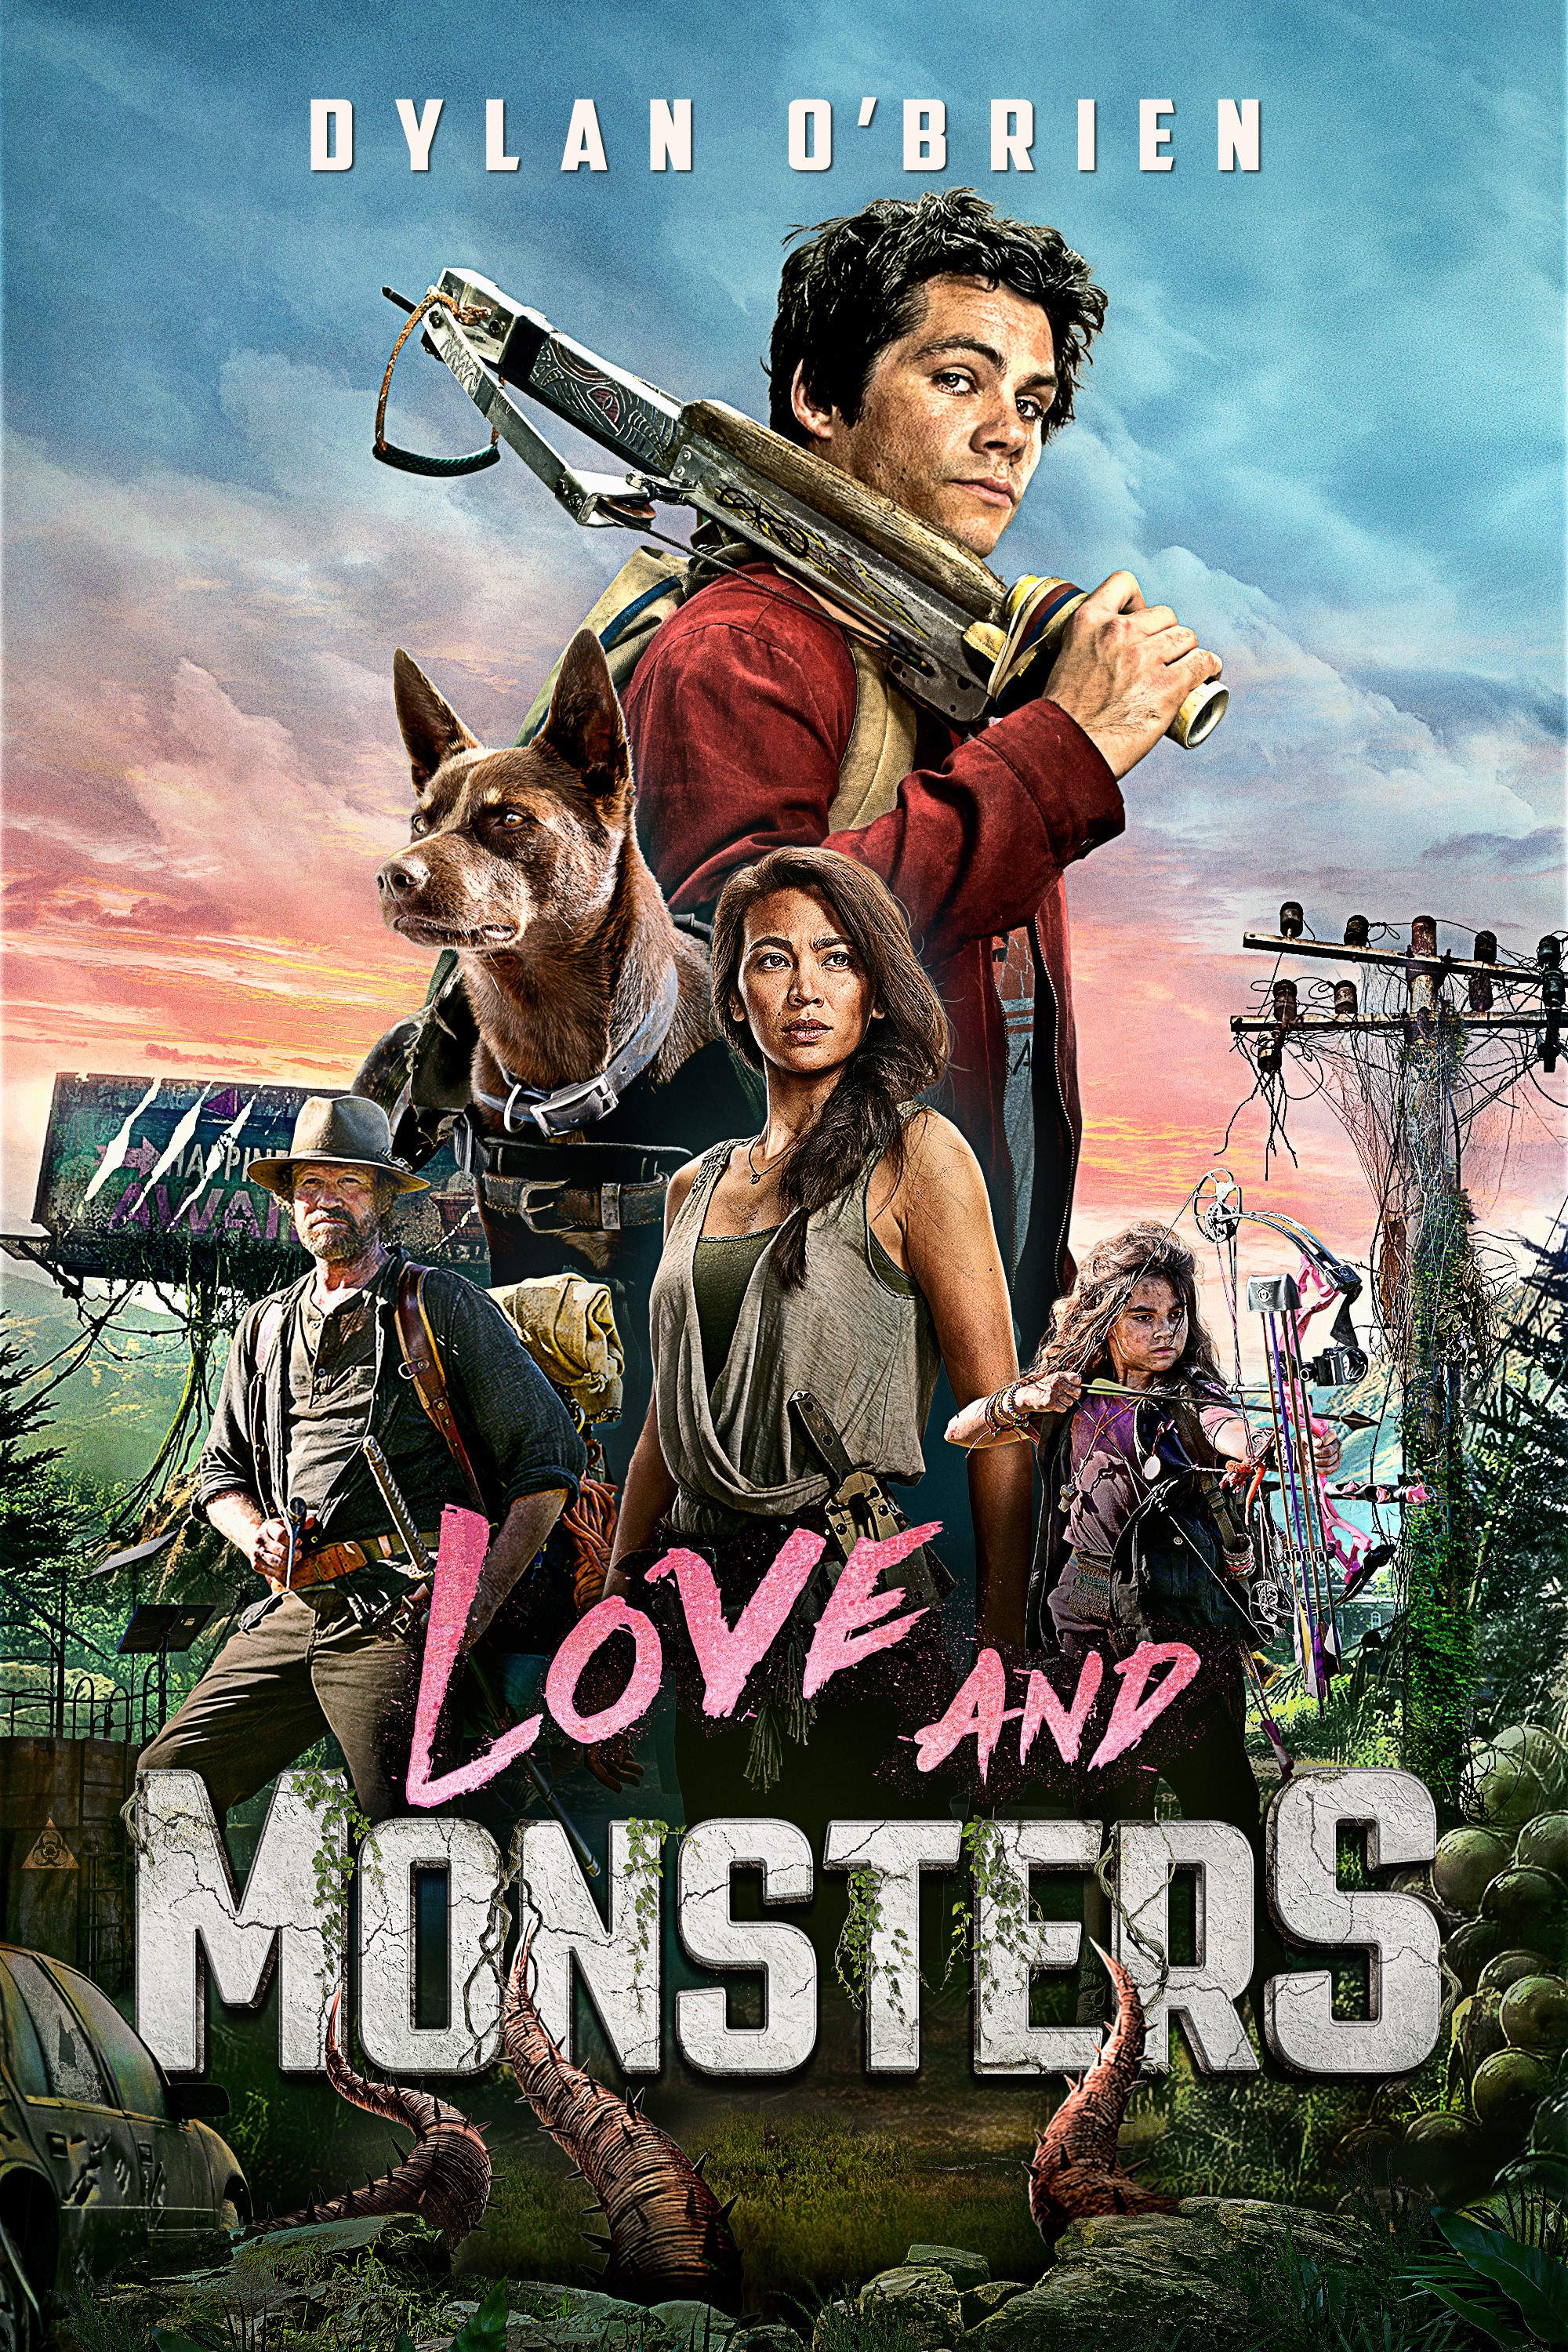 Love And Monsters (2020) Main Poster